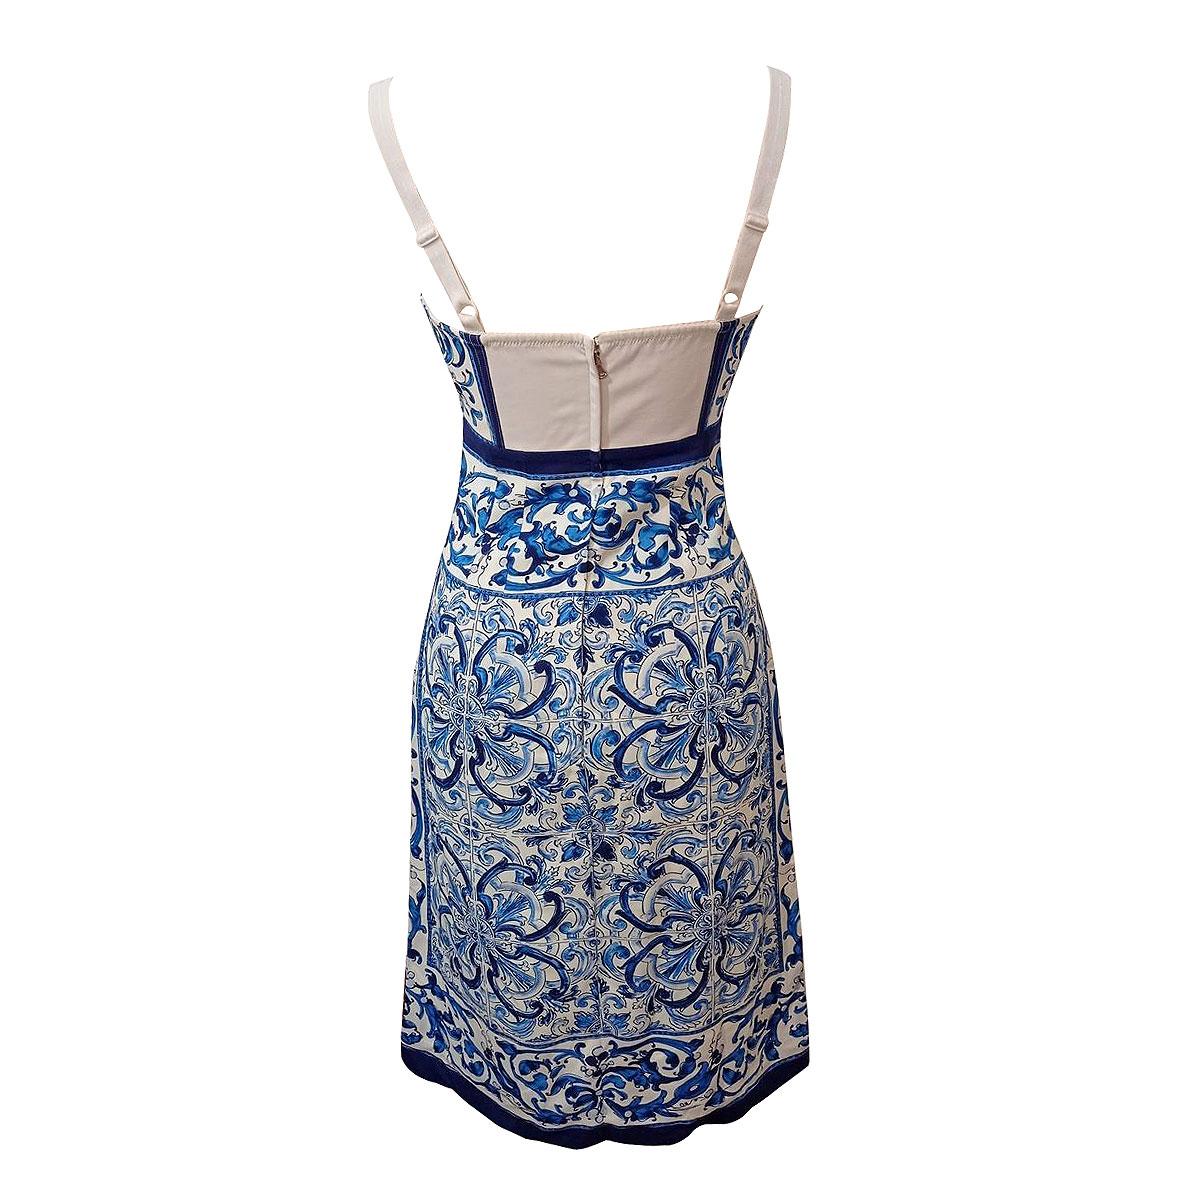 Wonderful cocktail dress by Dolce & Gabbana
Silk (85%) Polyamid (8%) Elasthane (7%)
Light blue and white color
Majolica fancy
Elastic fabric
Maximum length cm 100 (39,37 inches)
Worldwide express shipping included in the price !